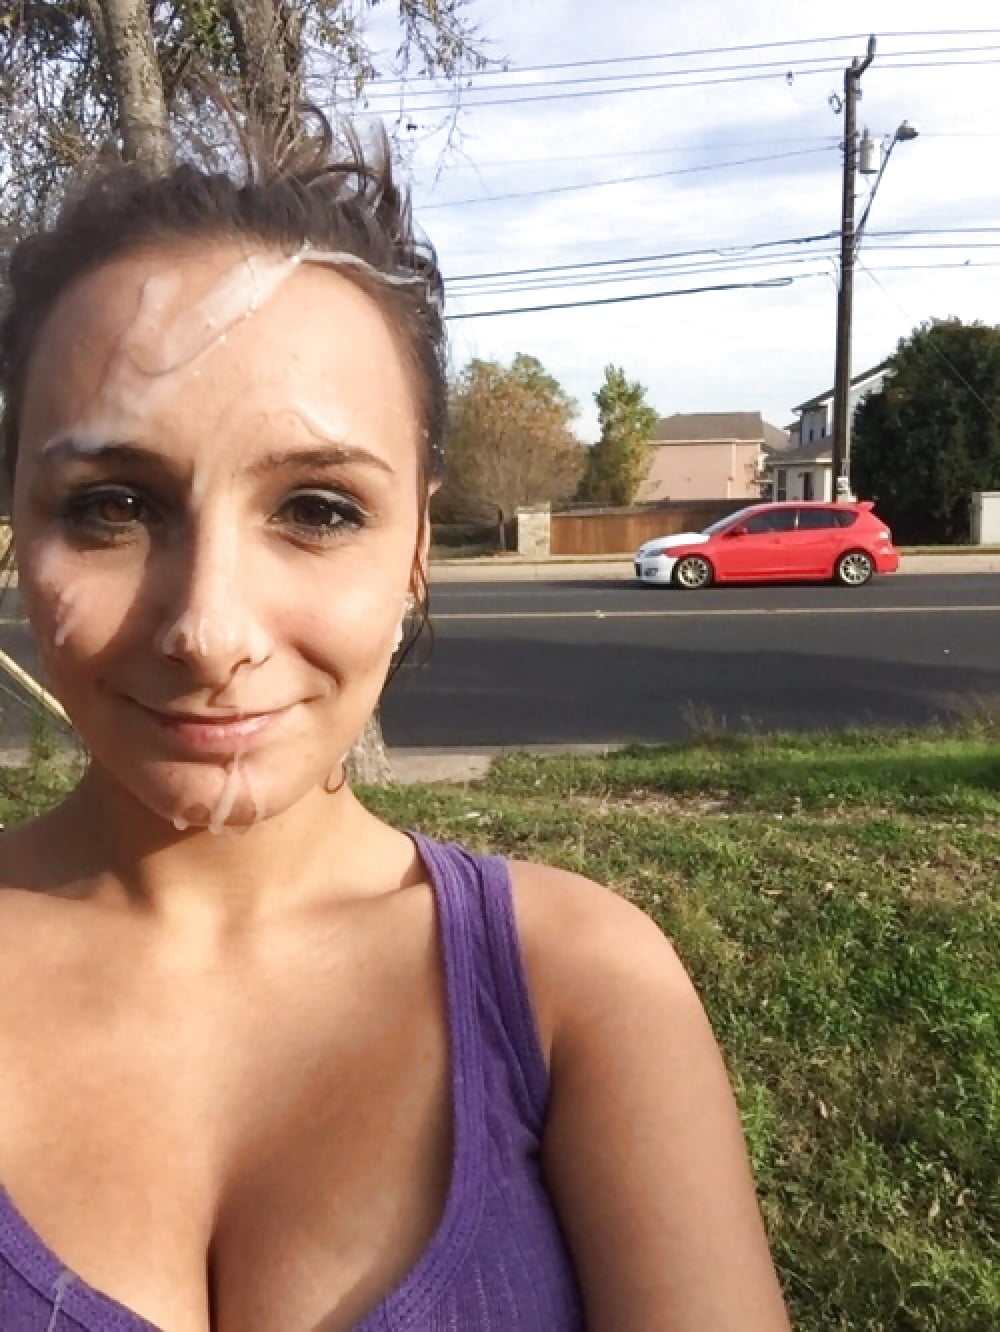 Proud of her public cum facial ... pick one for a date ?! (6/12)